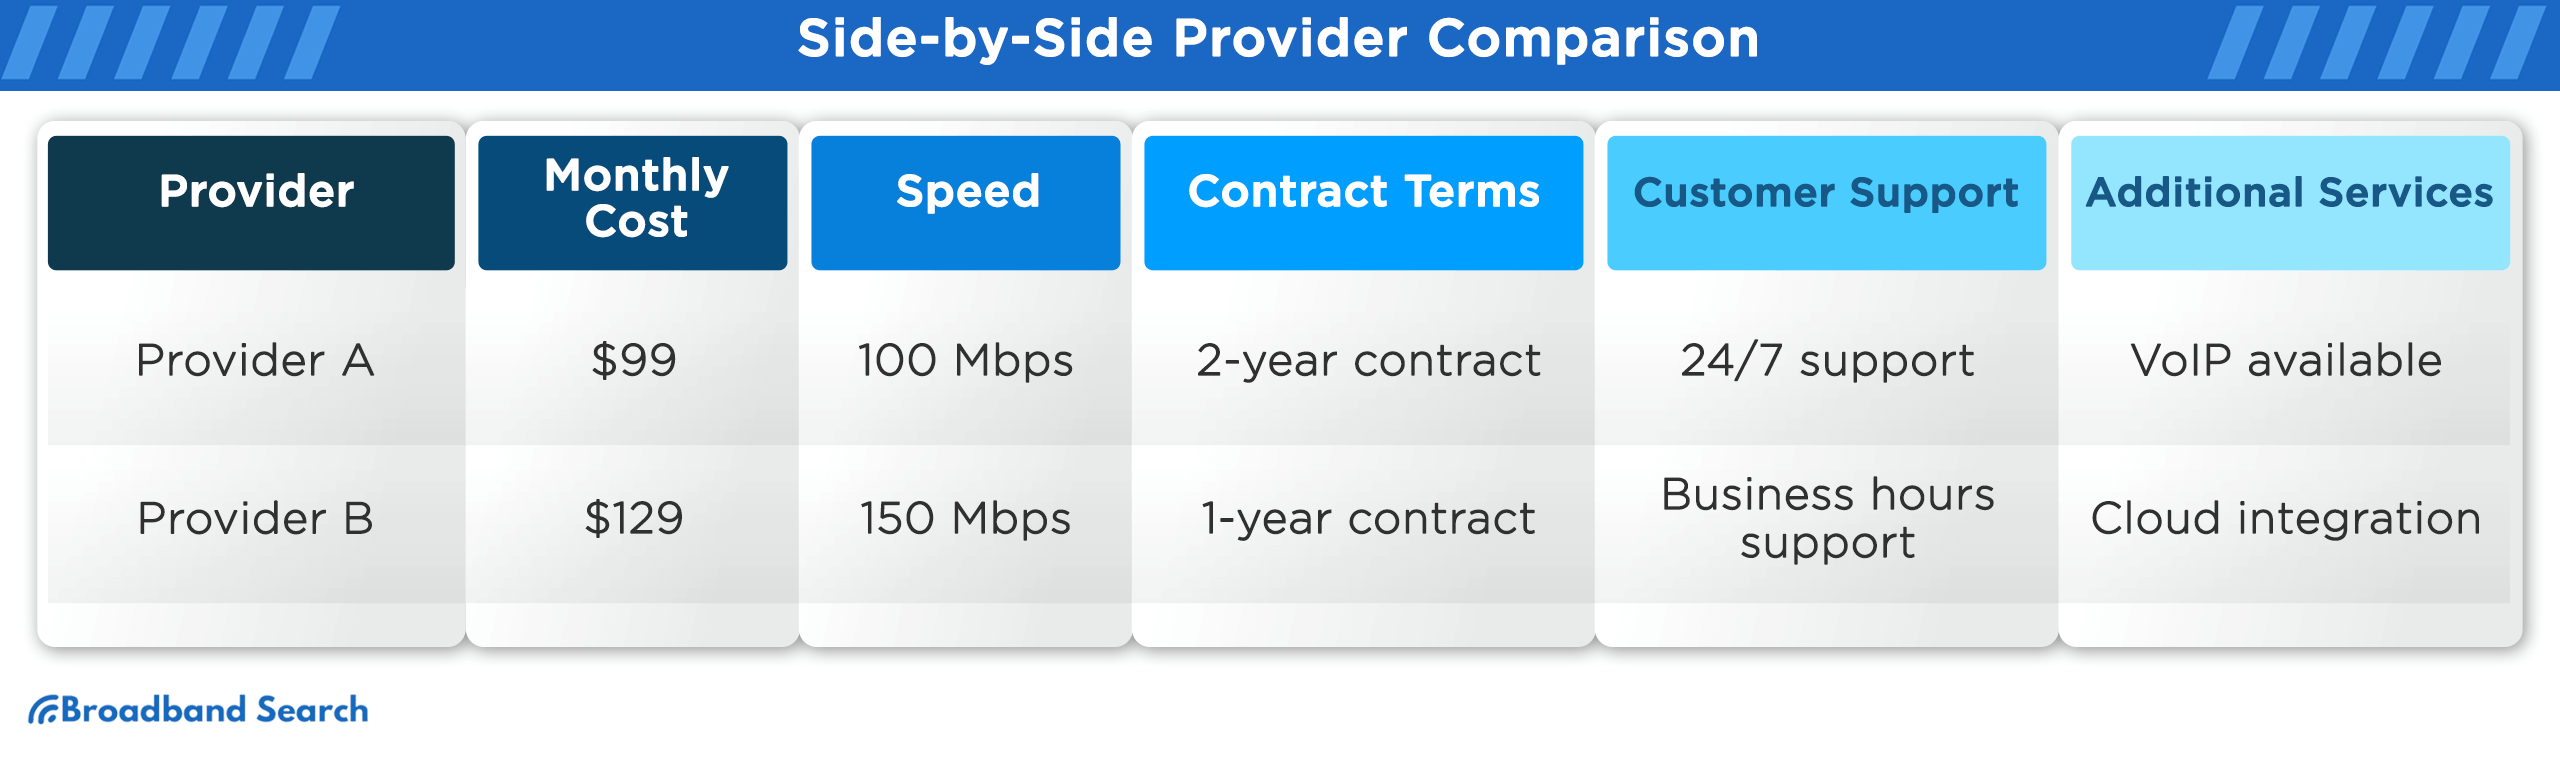 Side by side comparison between provider a and b